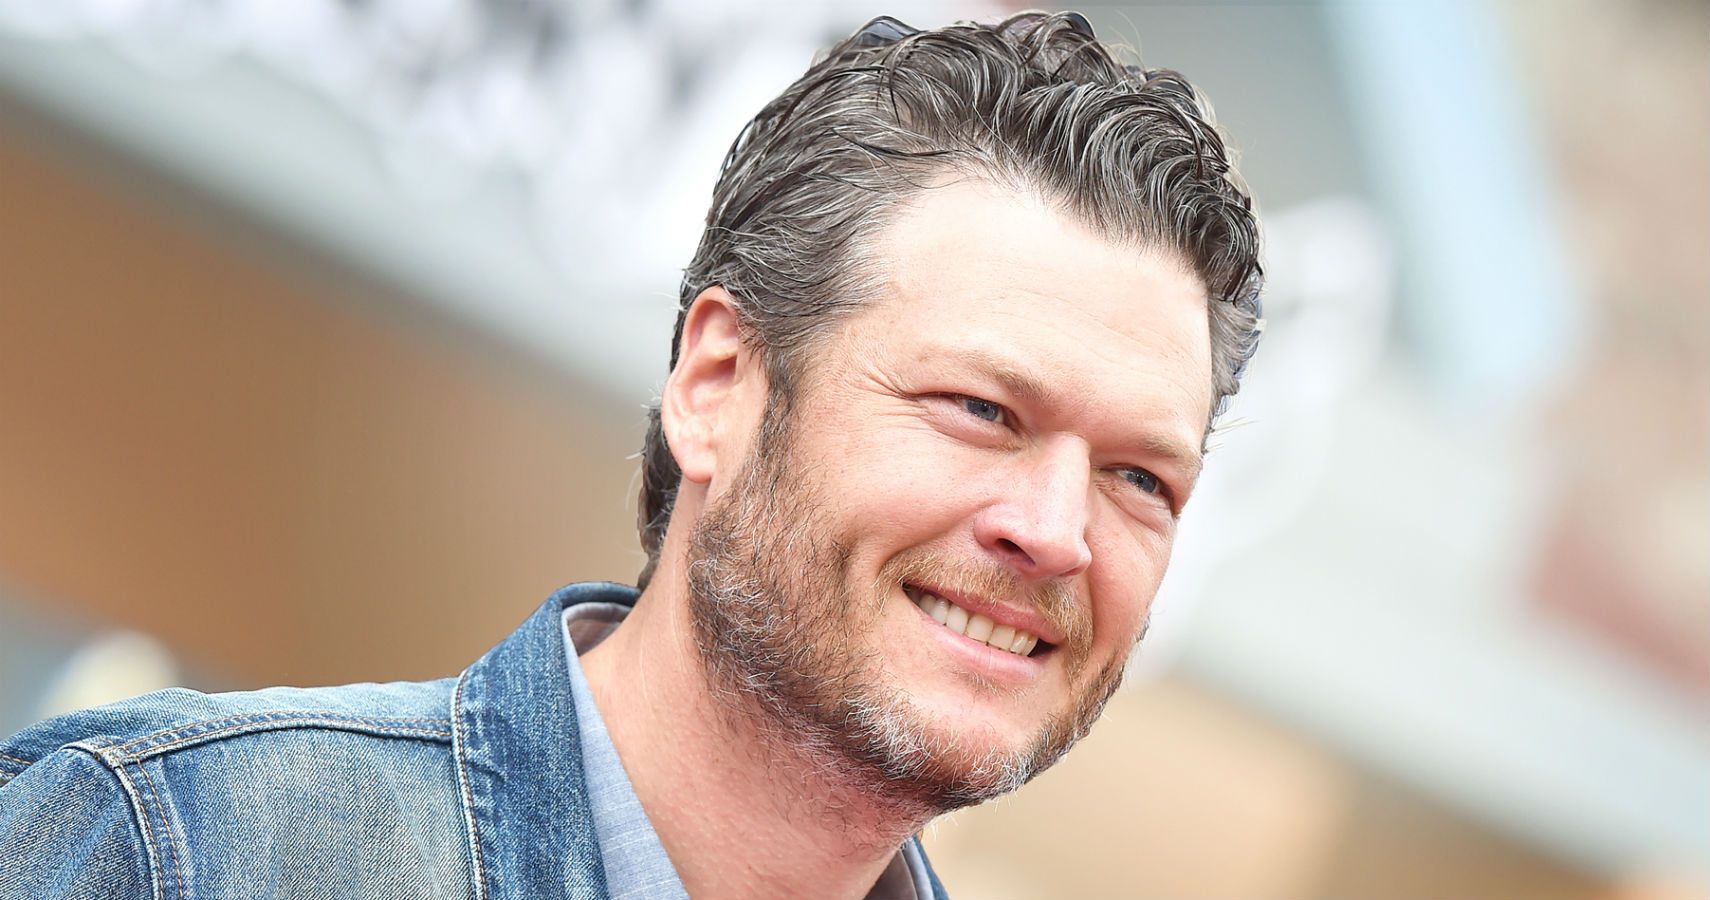 Blake Shelton Used Her Textbook And Her Mom Is Not Happy About It